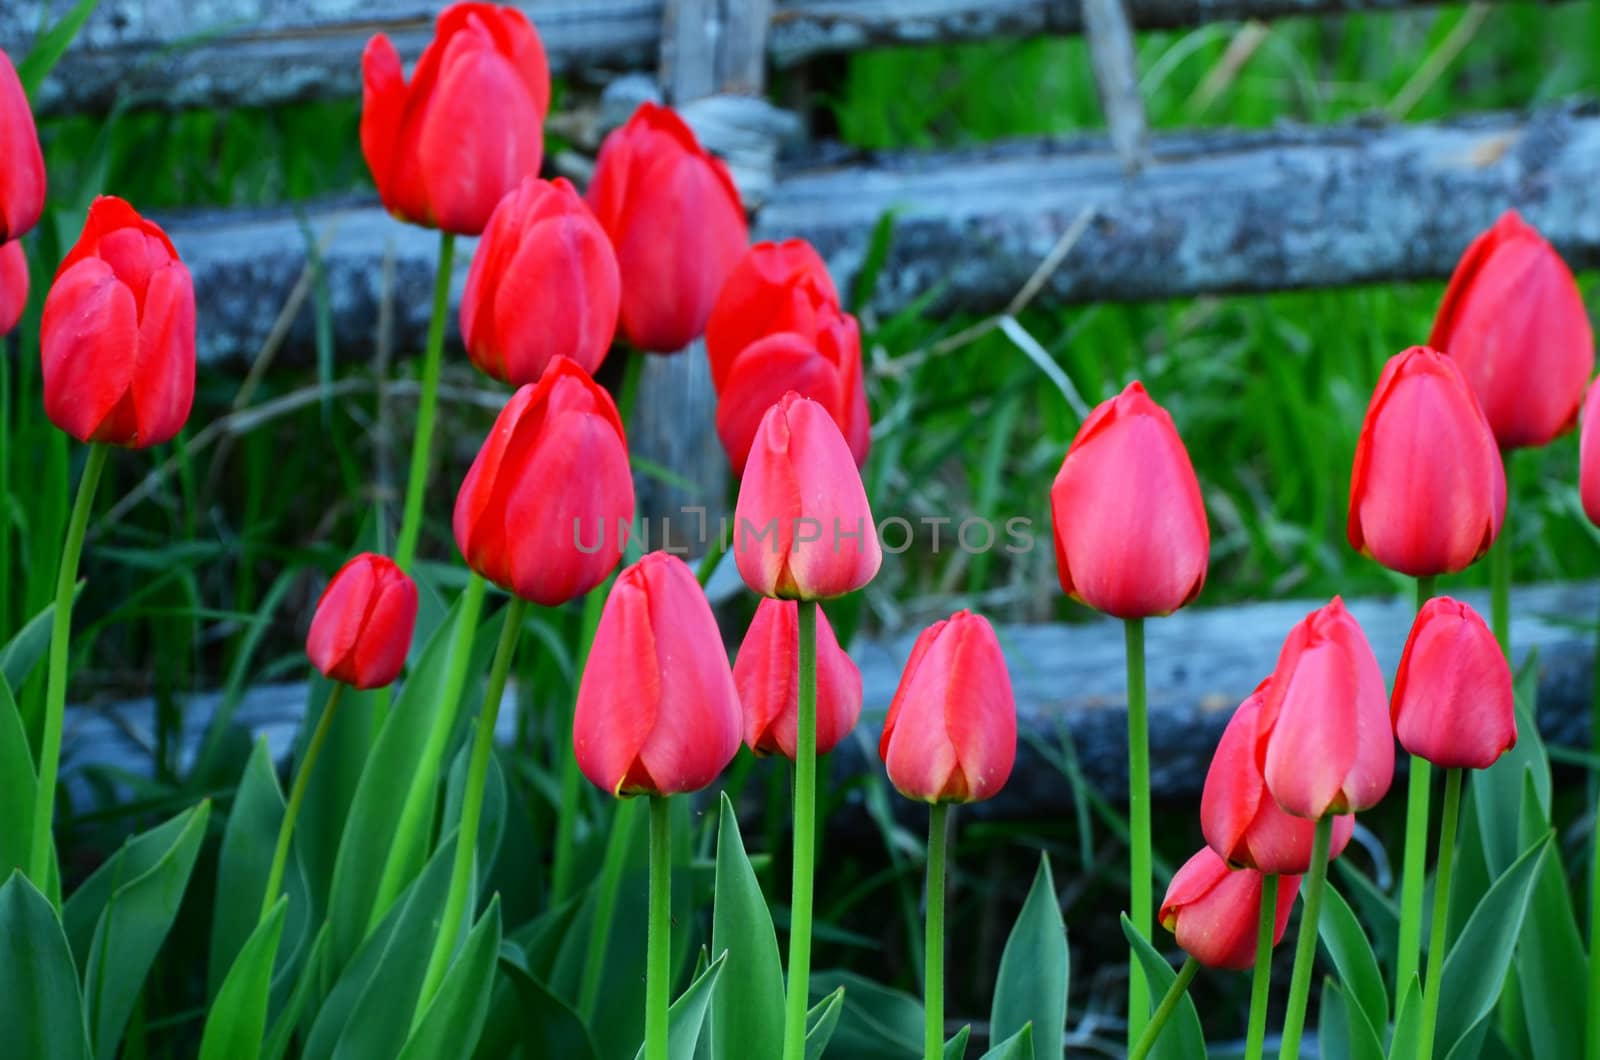 Red tulips by ljusnan69